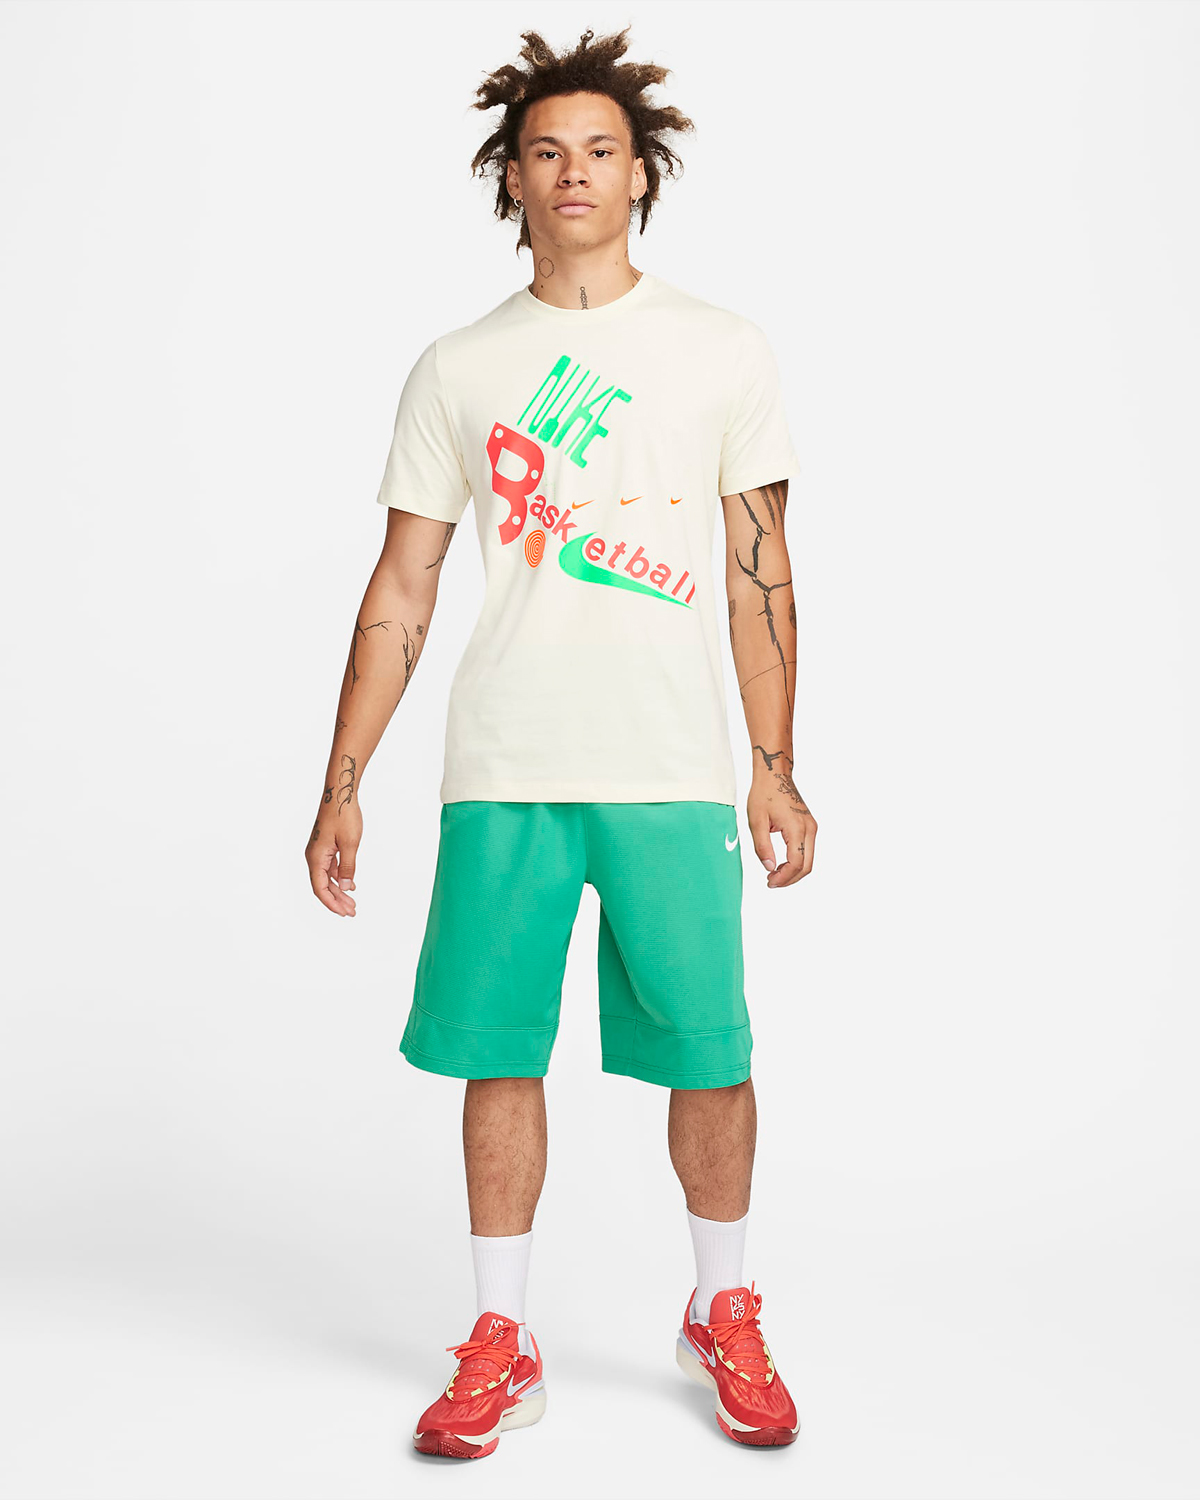 Nike-Swoosh-Basketball-T-Shirt-Coconut-Milk-Outfit